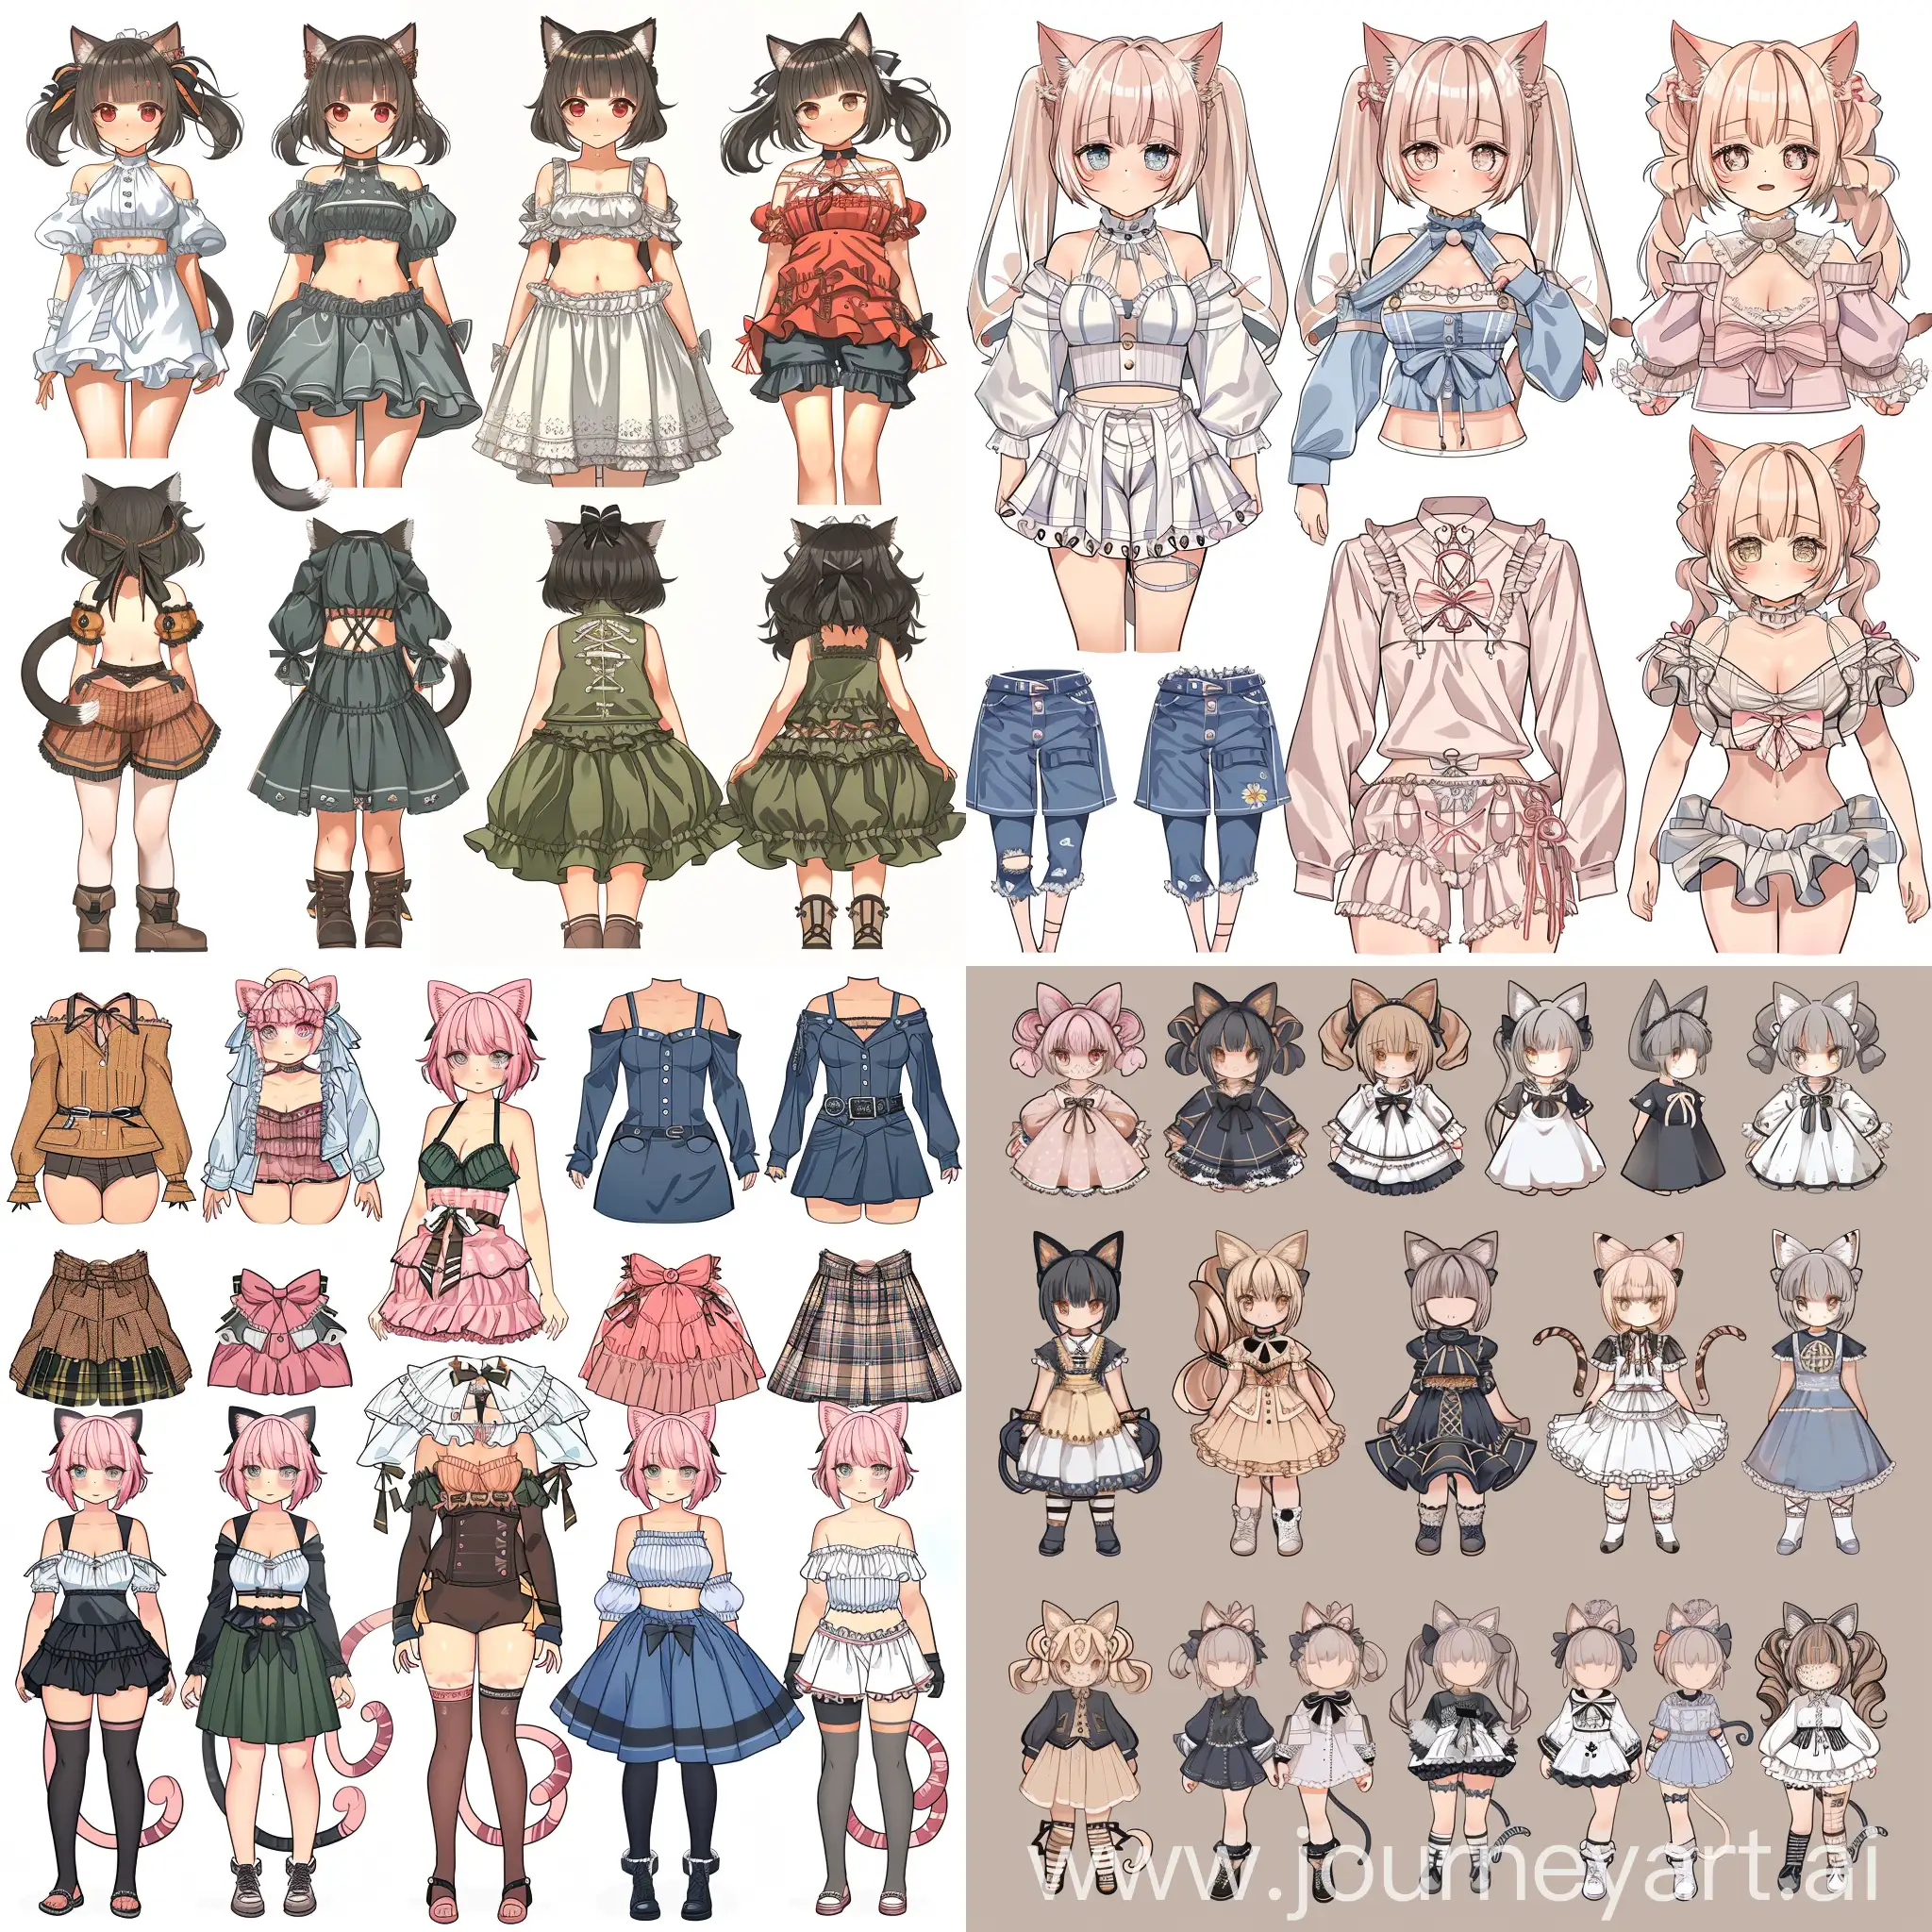 Cute Neko girl, reference sheet, cute and interesting clothes